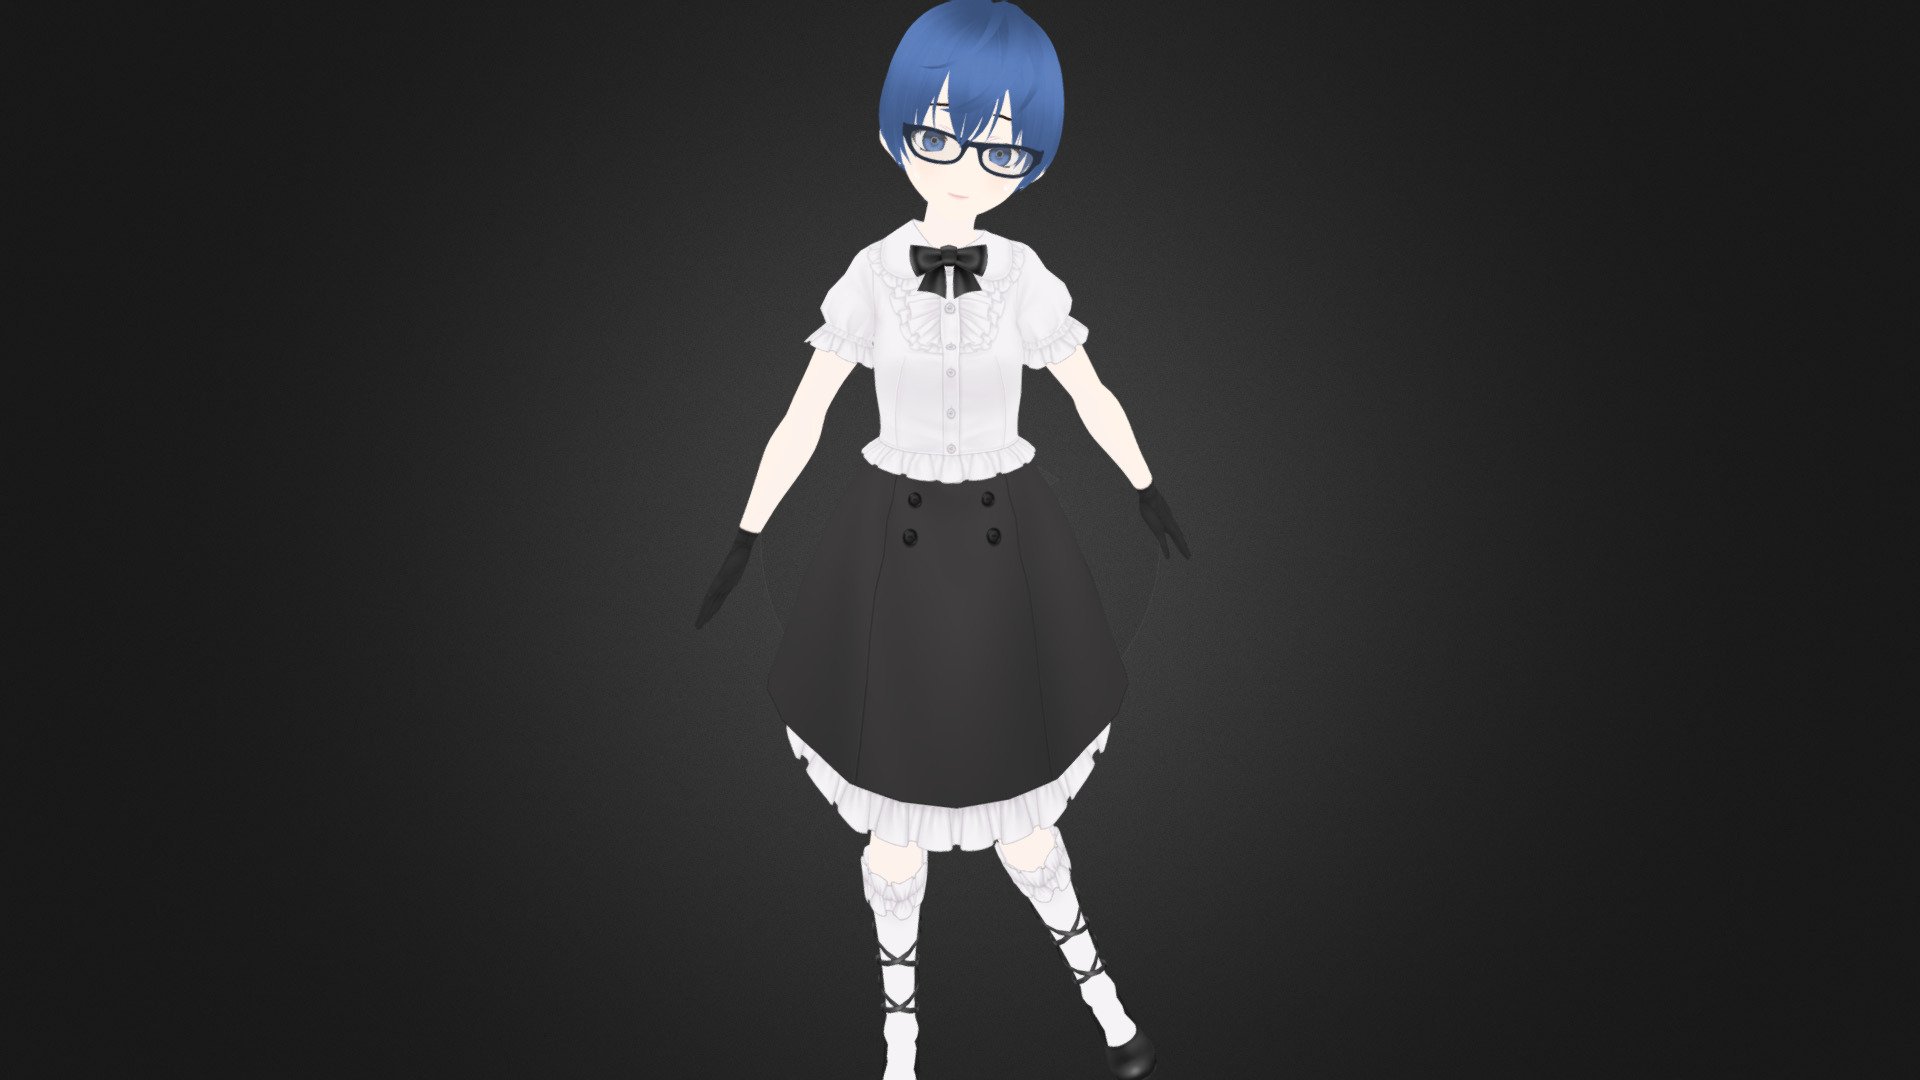 Yui 3d Anime Character Girl For Blender Buy Royalty Free 3d Model By Cgtoon Cgbest C062ae6 4549